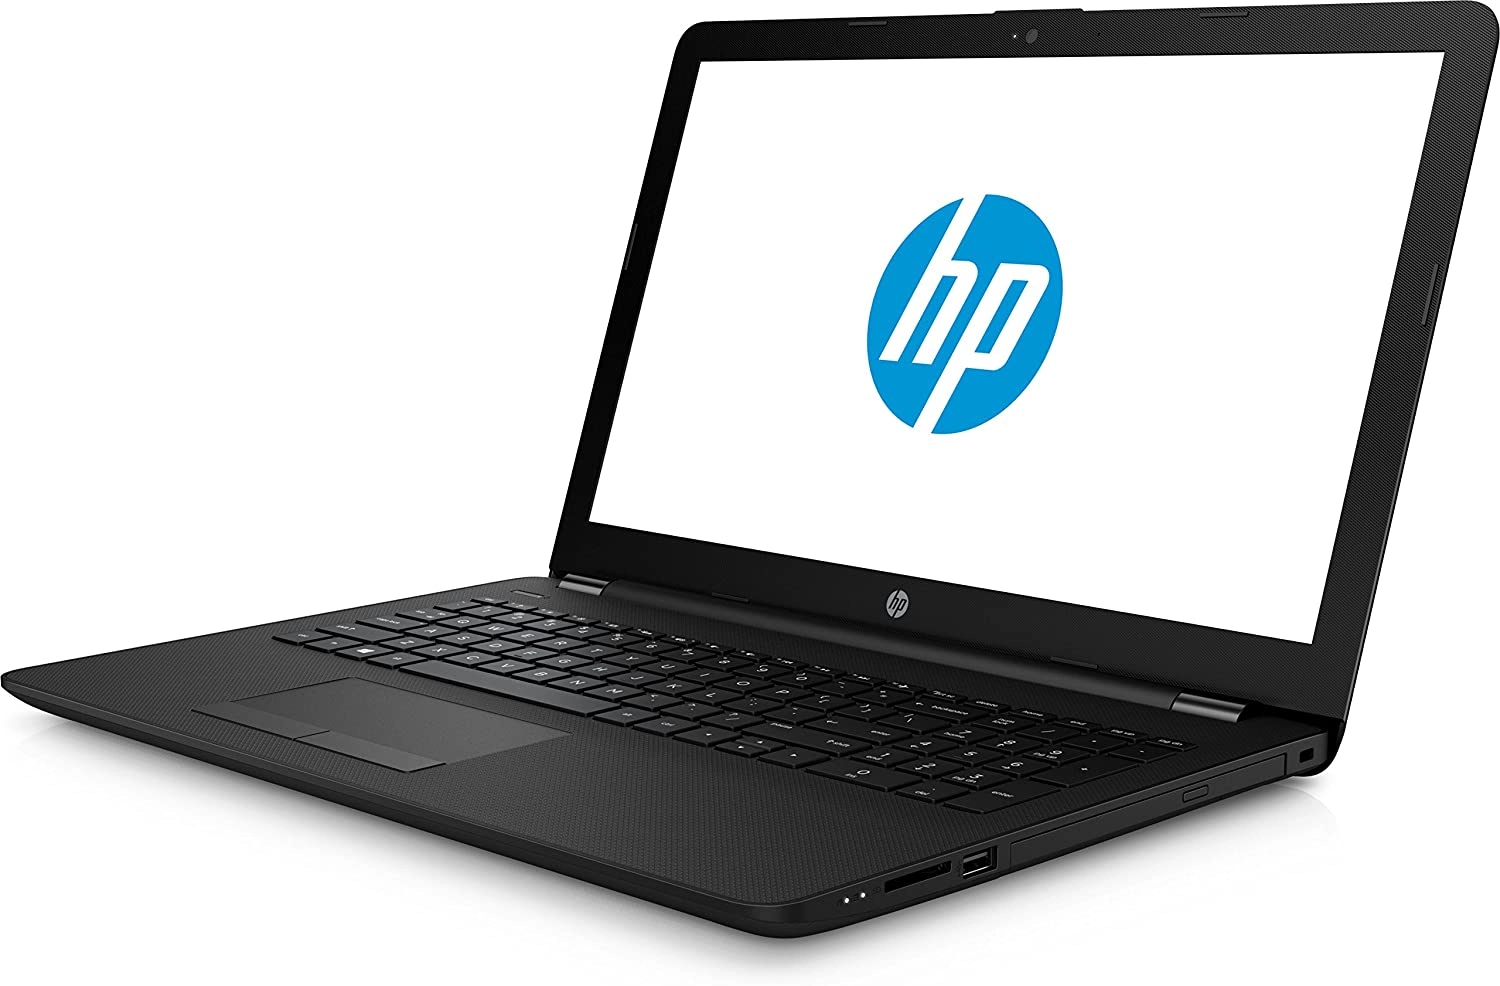 HP 15-bs130ns laptop image